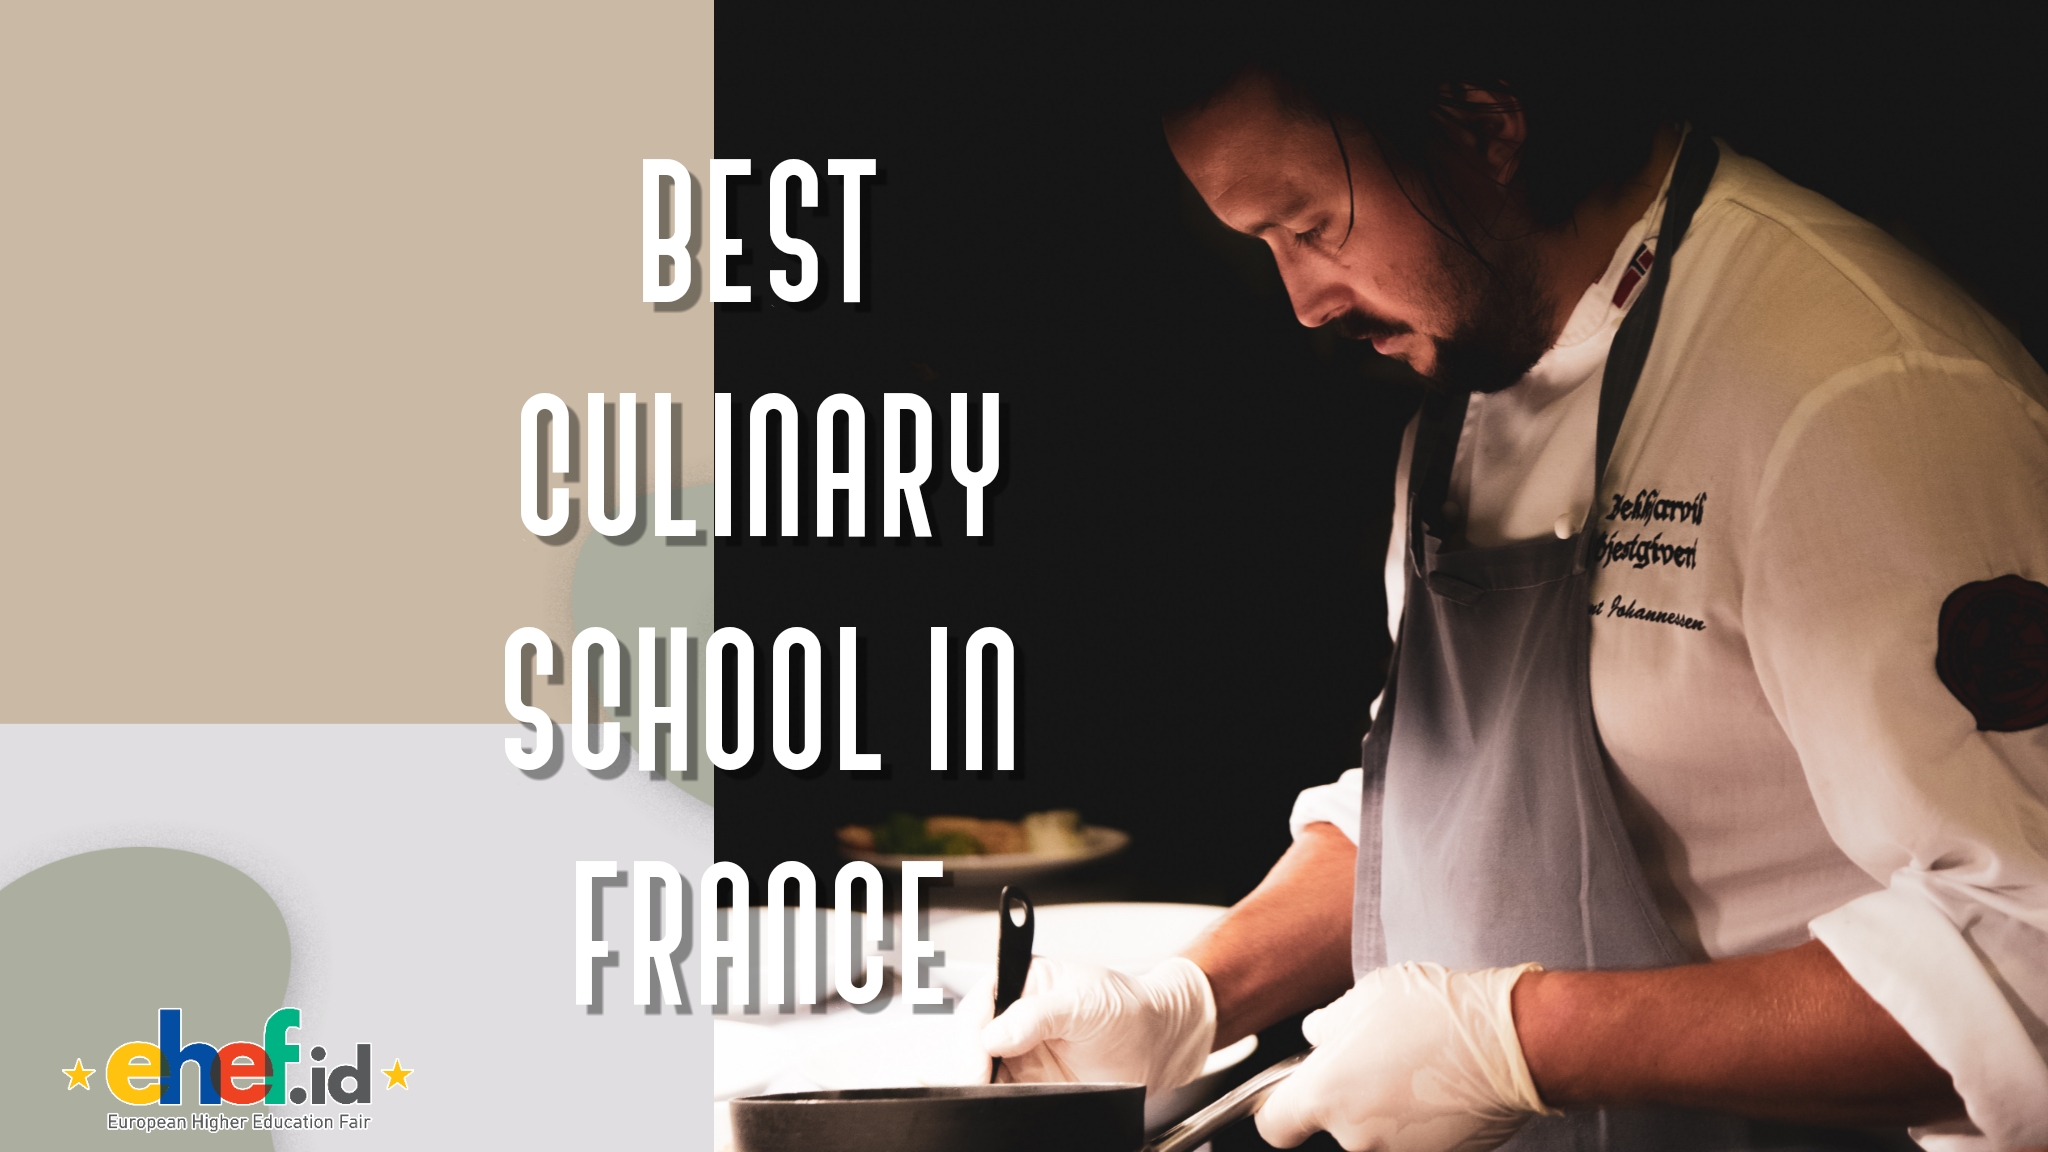 Best Culinary Schools for Studying French Cuisine